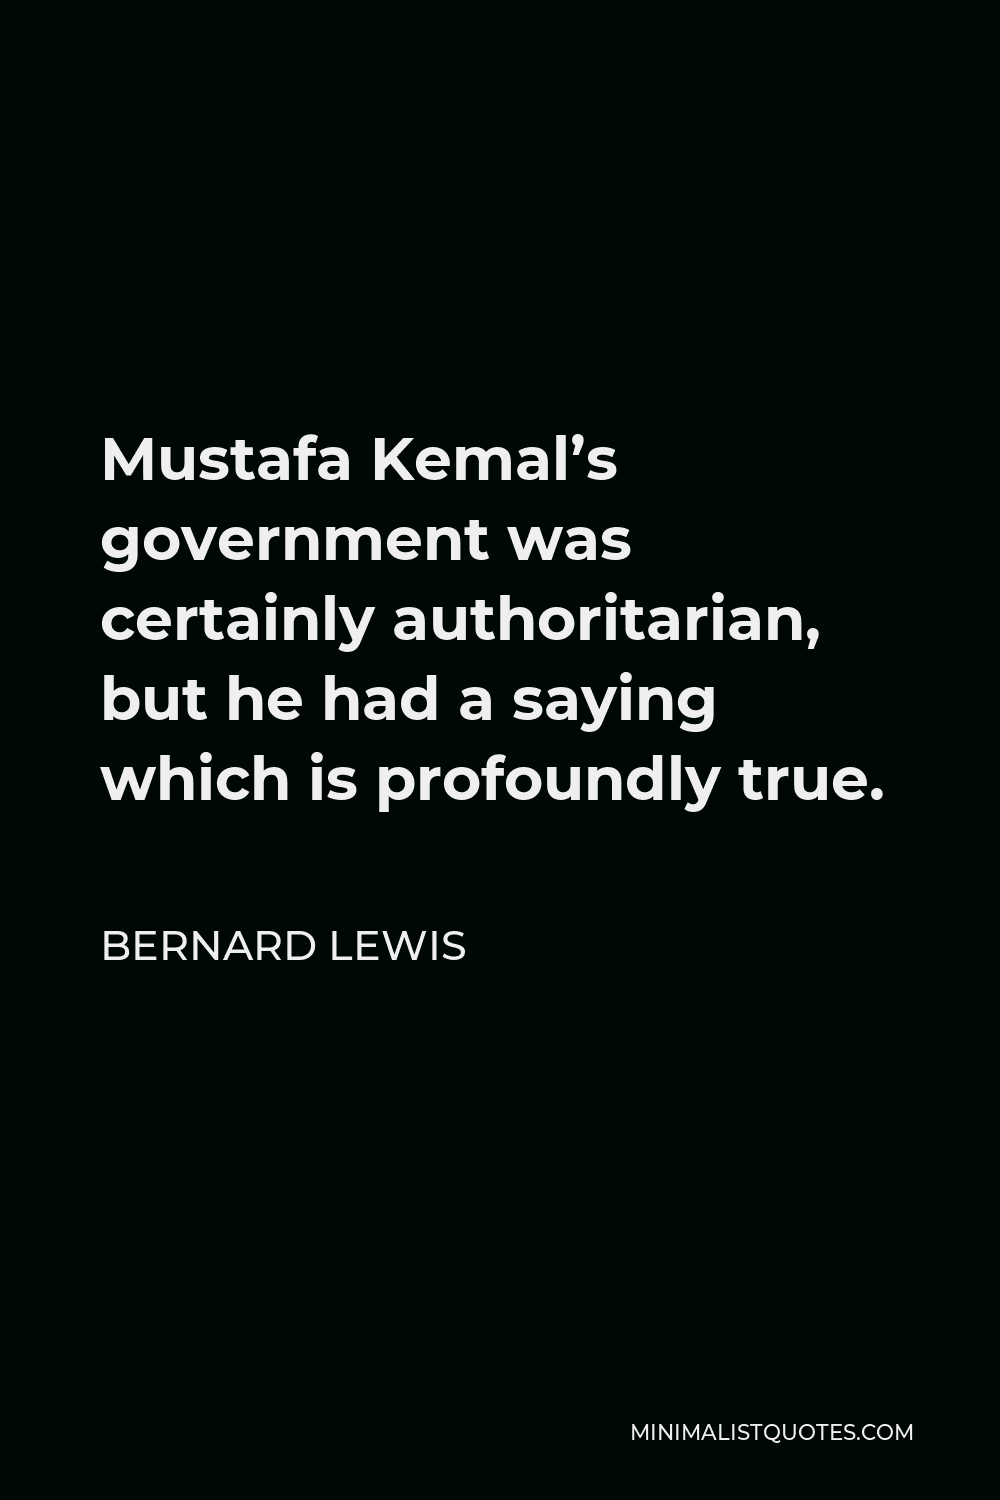 Bernard Lewis Quote - Mustafa Kemal’s government was certainly authoritarian, but he had a saying which is profoundly true.